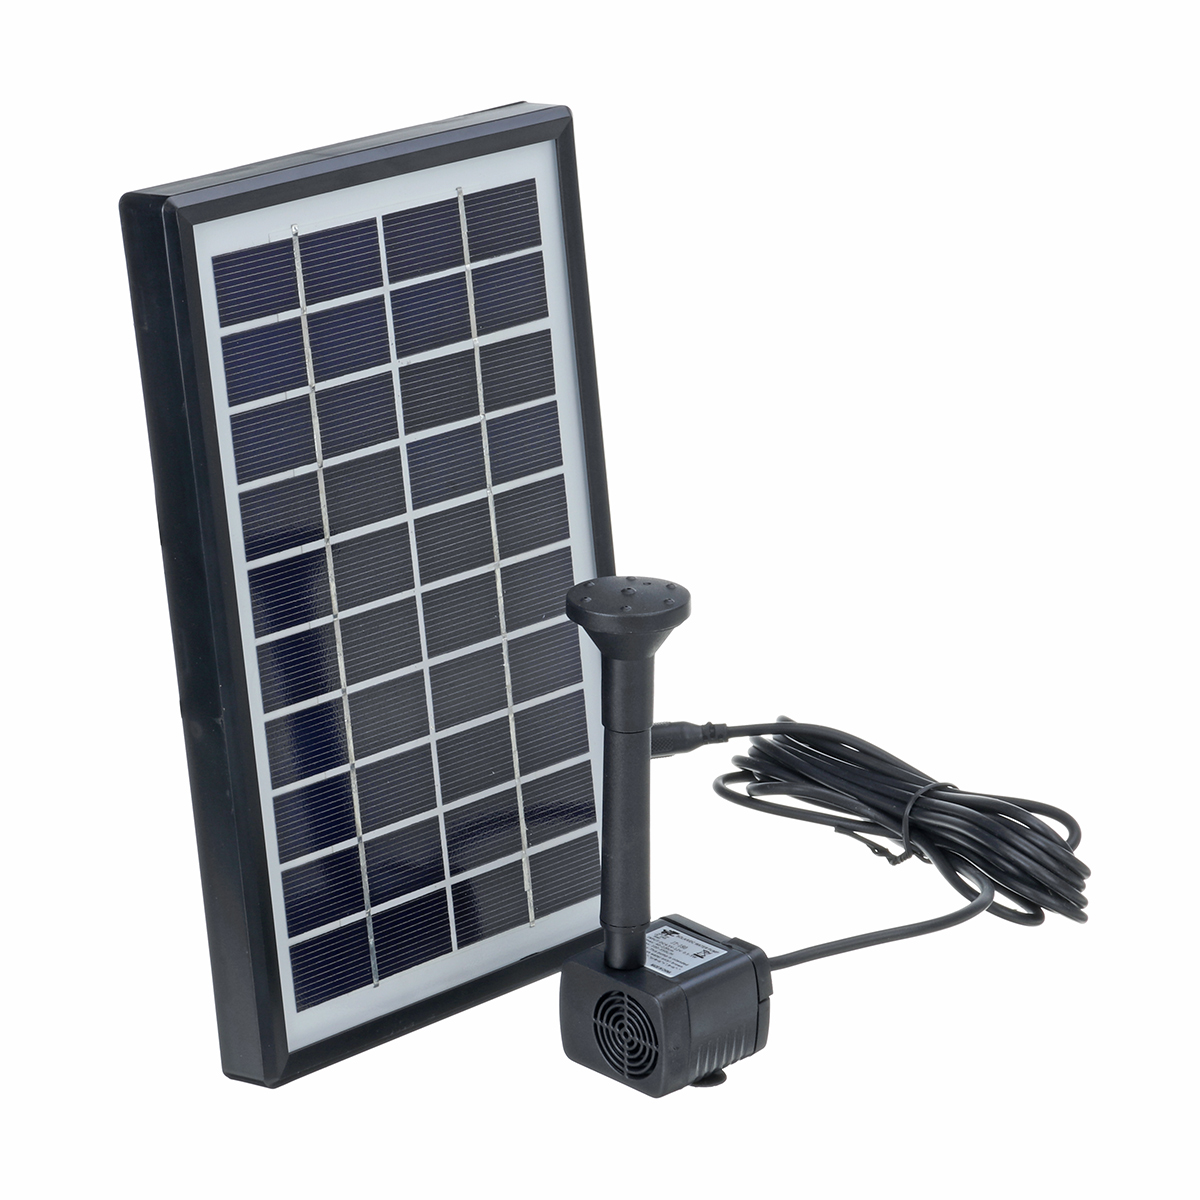 4W-10V-380LH-Solar-Panel-Water-Pump-Landscape-Pond-Pool-Aquarium-Floating-Fountain-with-6-Nozzles-1543610-7